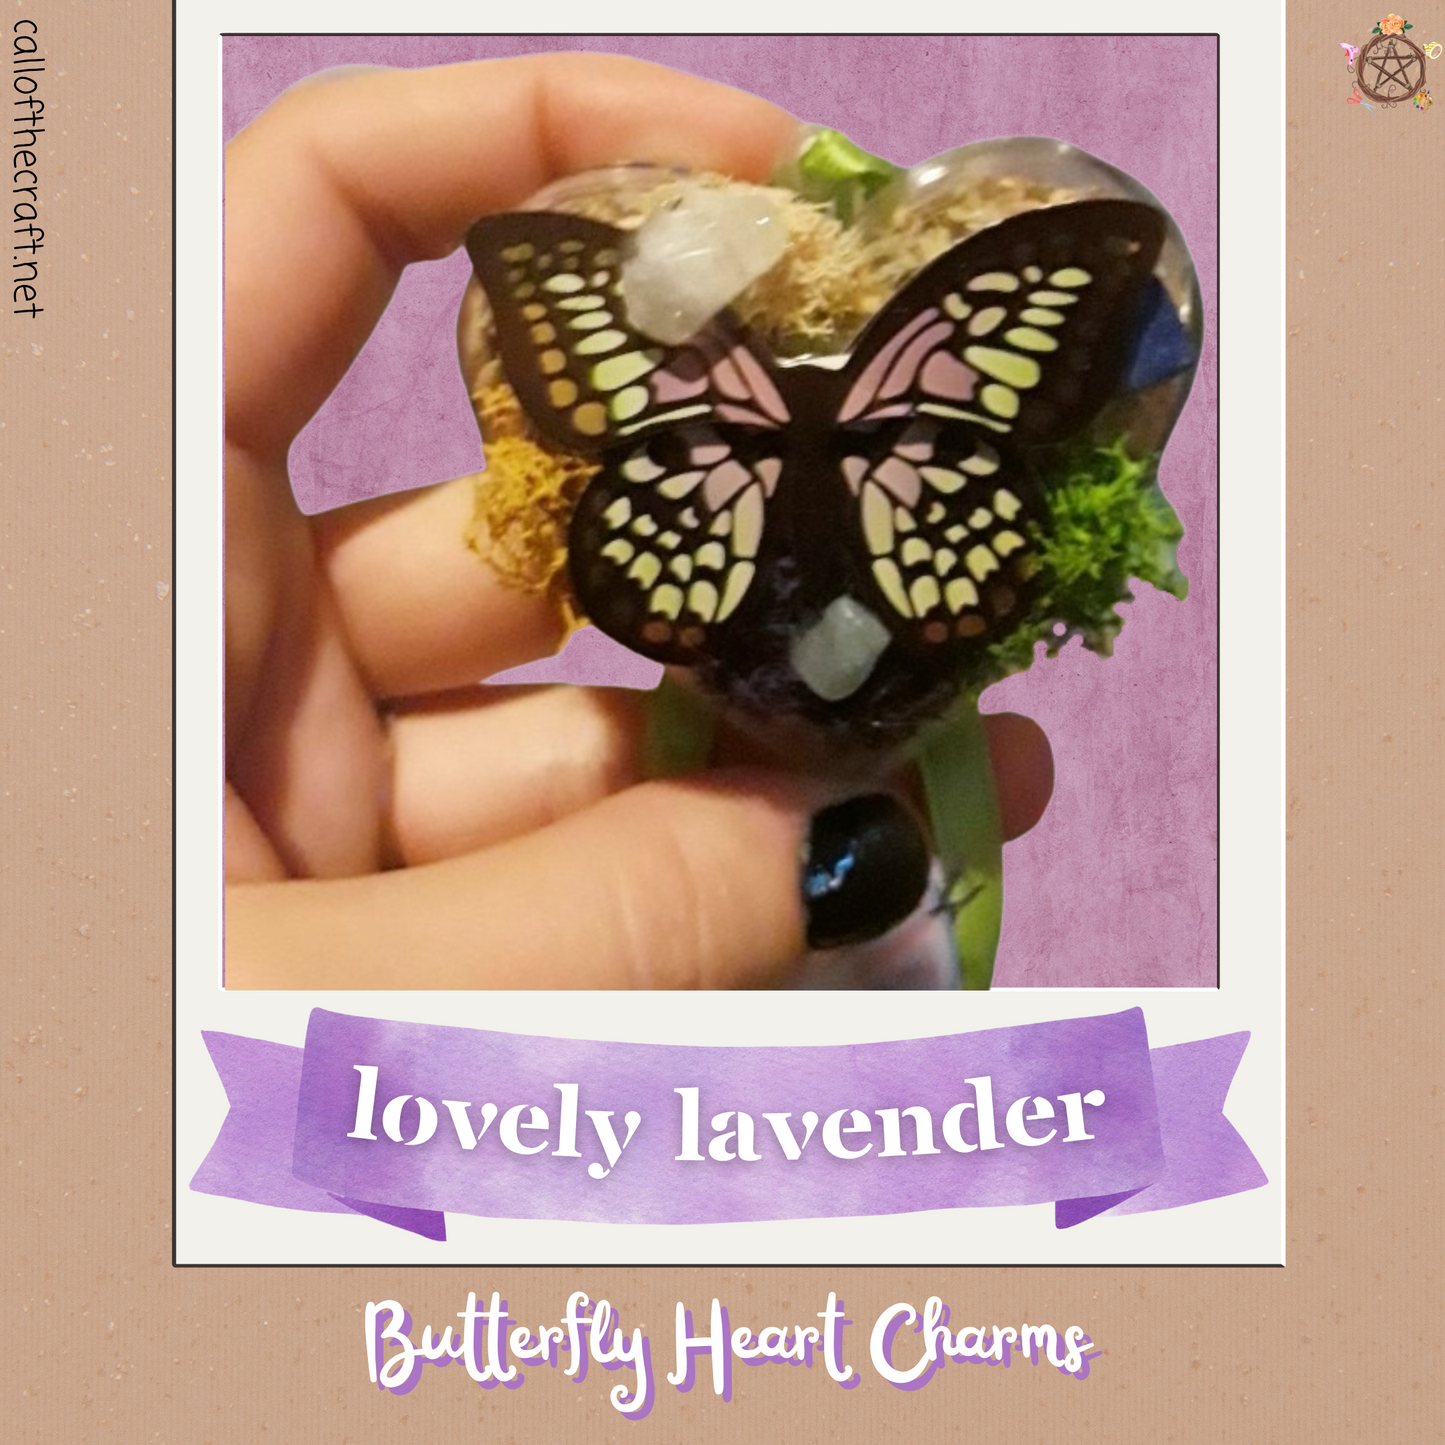 Butterfly Charms, Lovely Lavender - The Call of the Craft